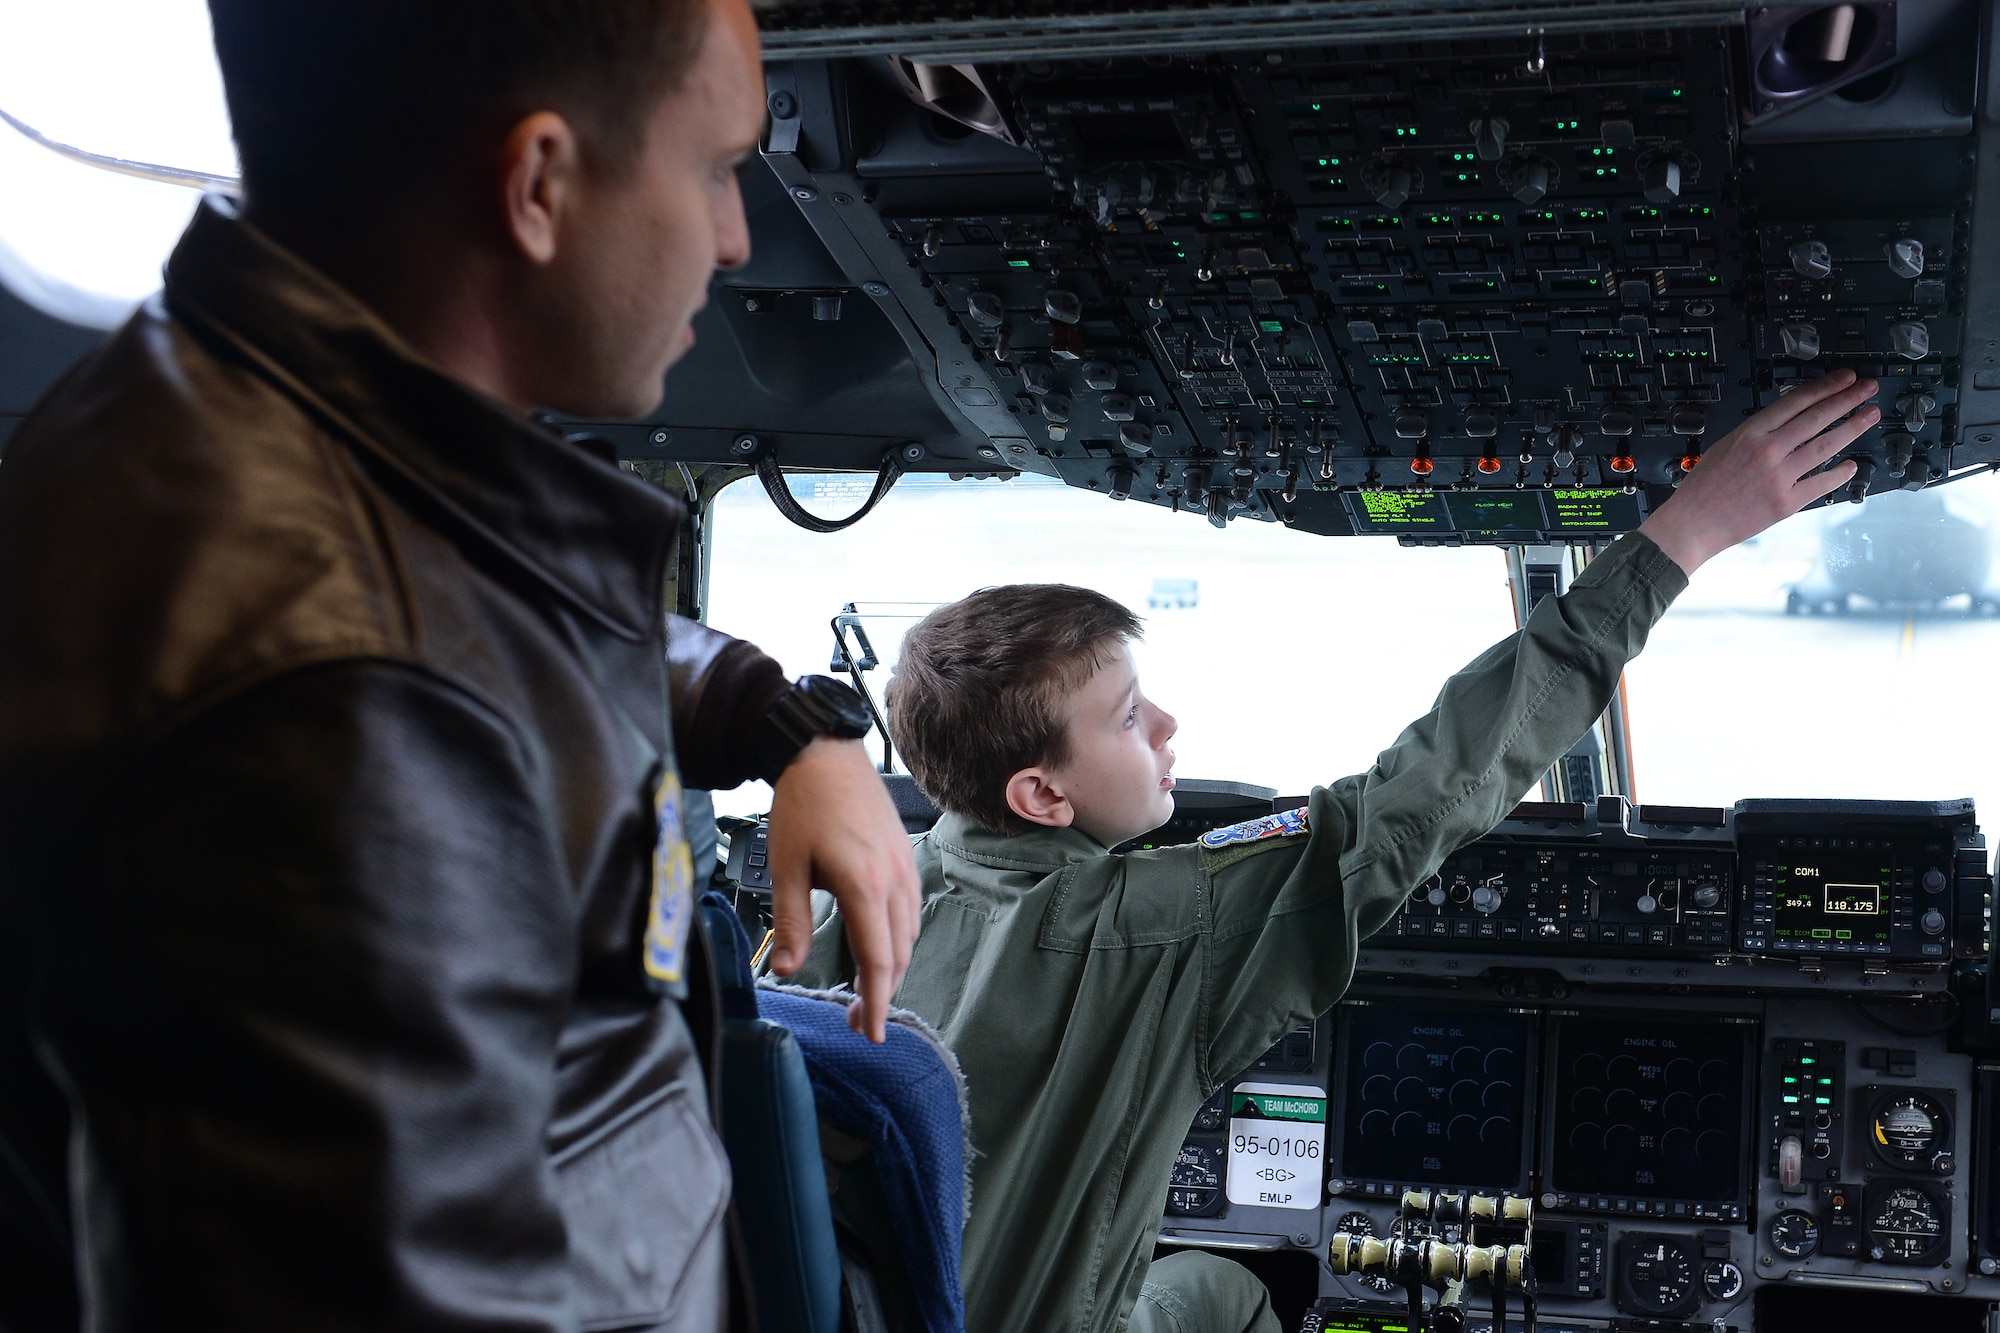 Carver Faull (right) explores the  buttons in the cockpit of a C-17 Globemaster III with 1st Lt. Brit Reuscher, 4th Airlift Squadron C-17 pilot, at Joint base Lewis-McChord, Wash. Feb. 20, 2015. Carver spent the day with members of McChord Field as part of the Pilot for a Day Program. (U.S. Air Force photo/Staff Sgt. Tim Chacon)